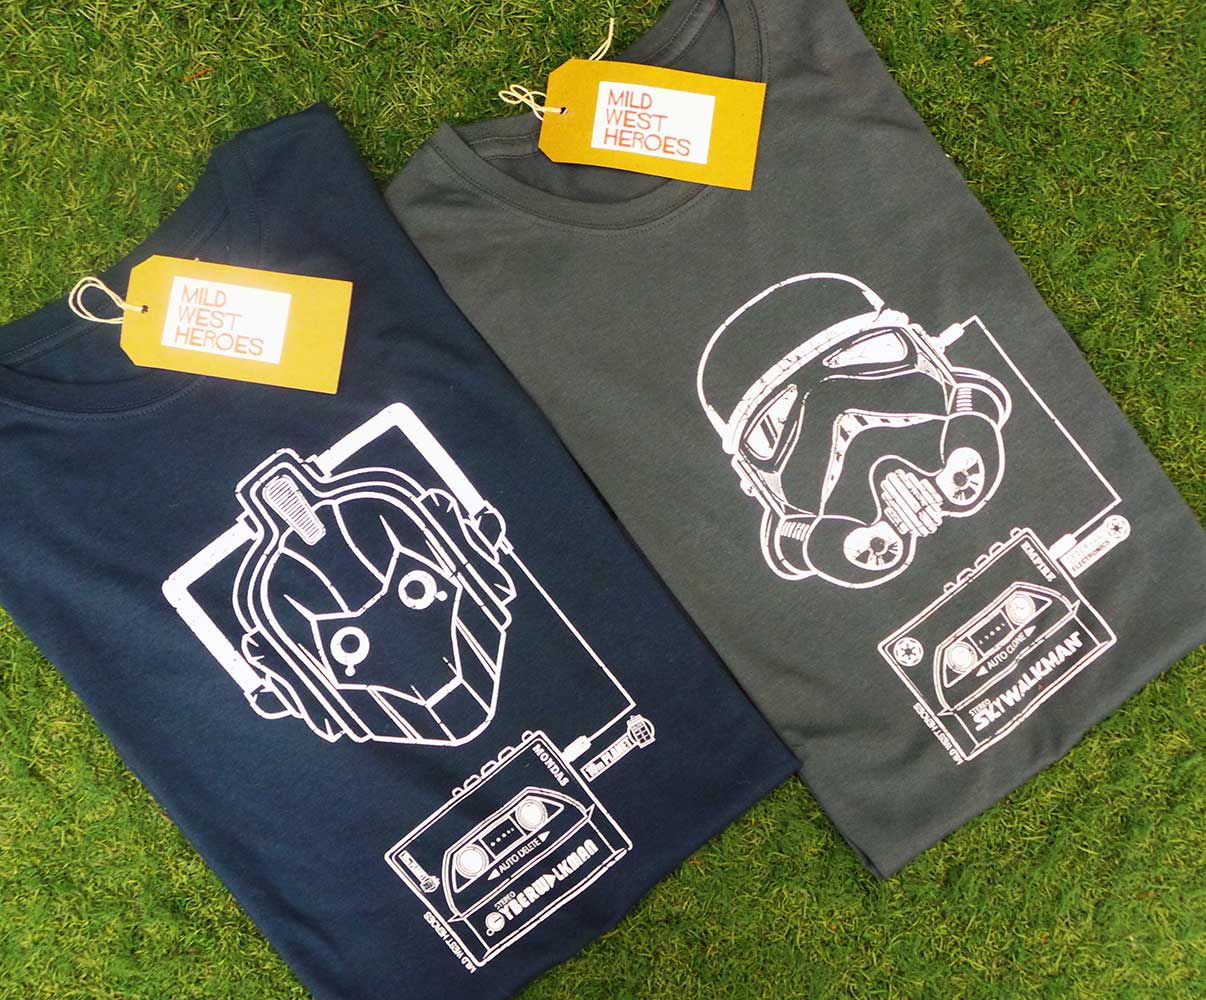 Stormtrooper and Cyberman T shirts